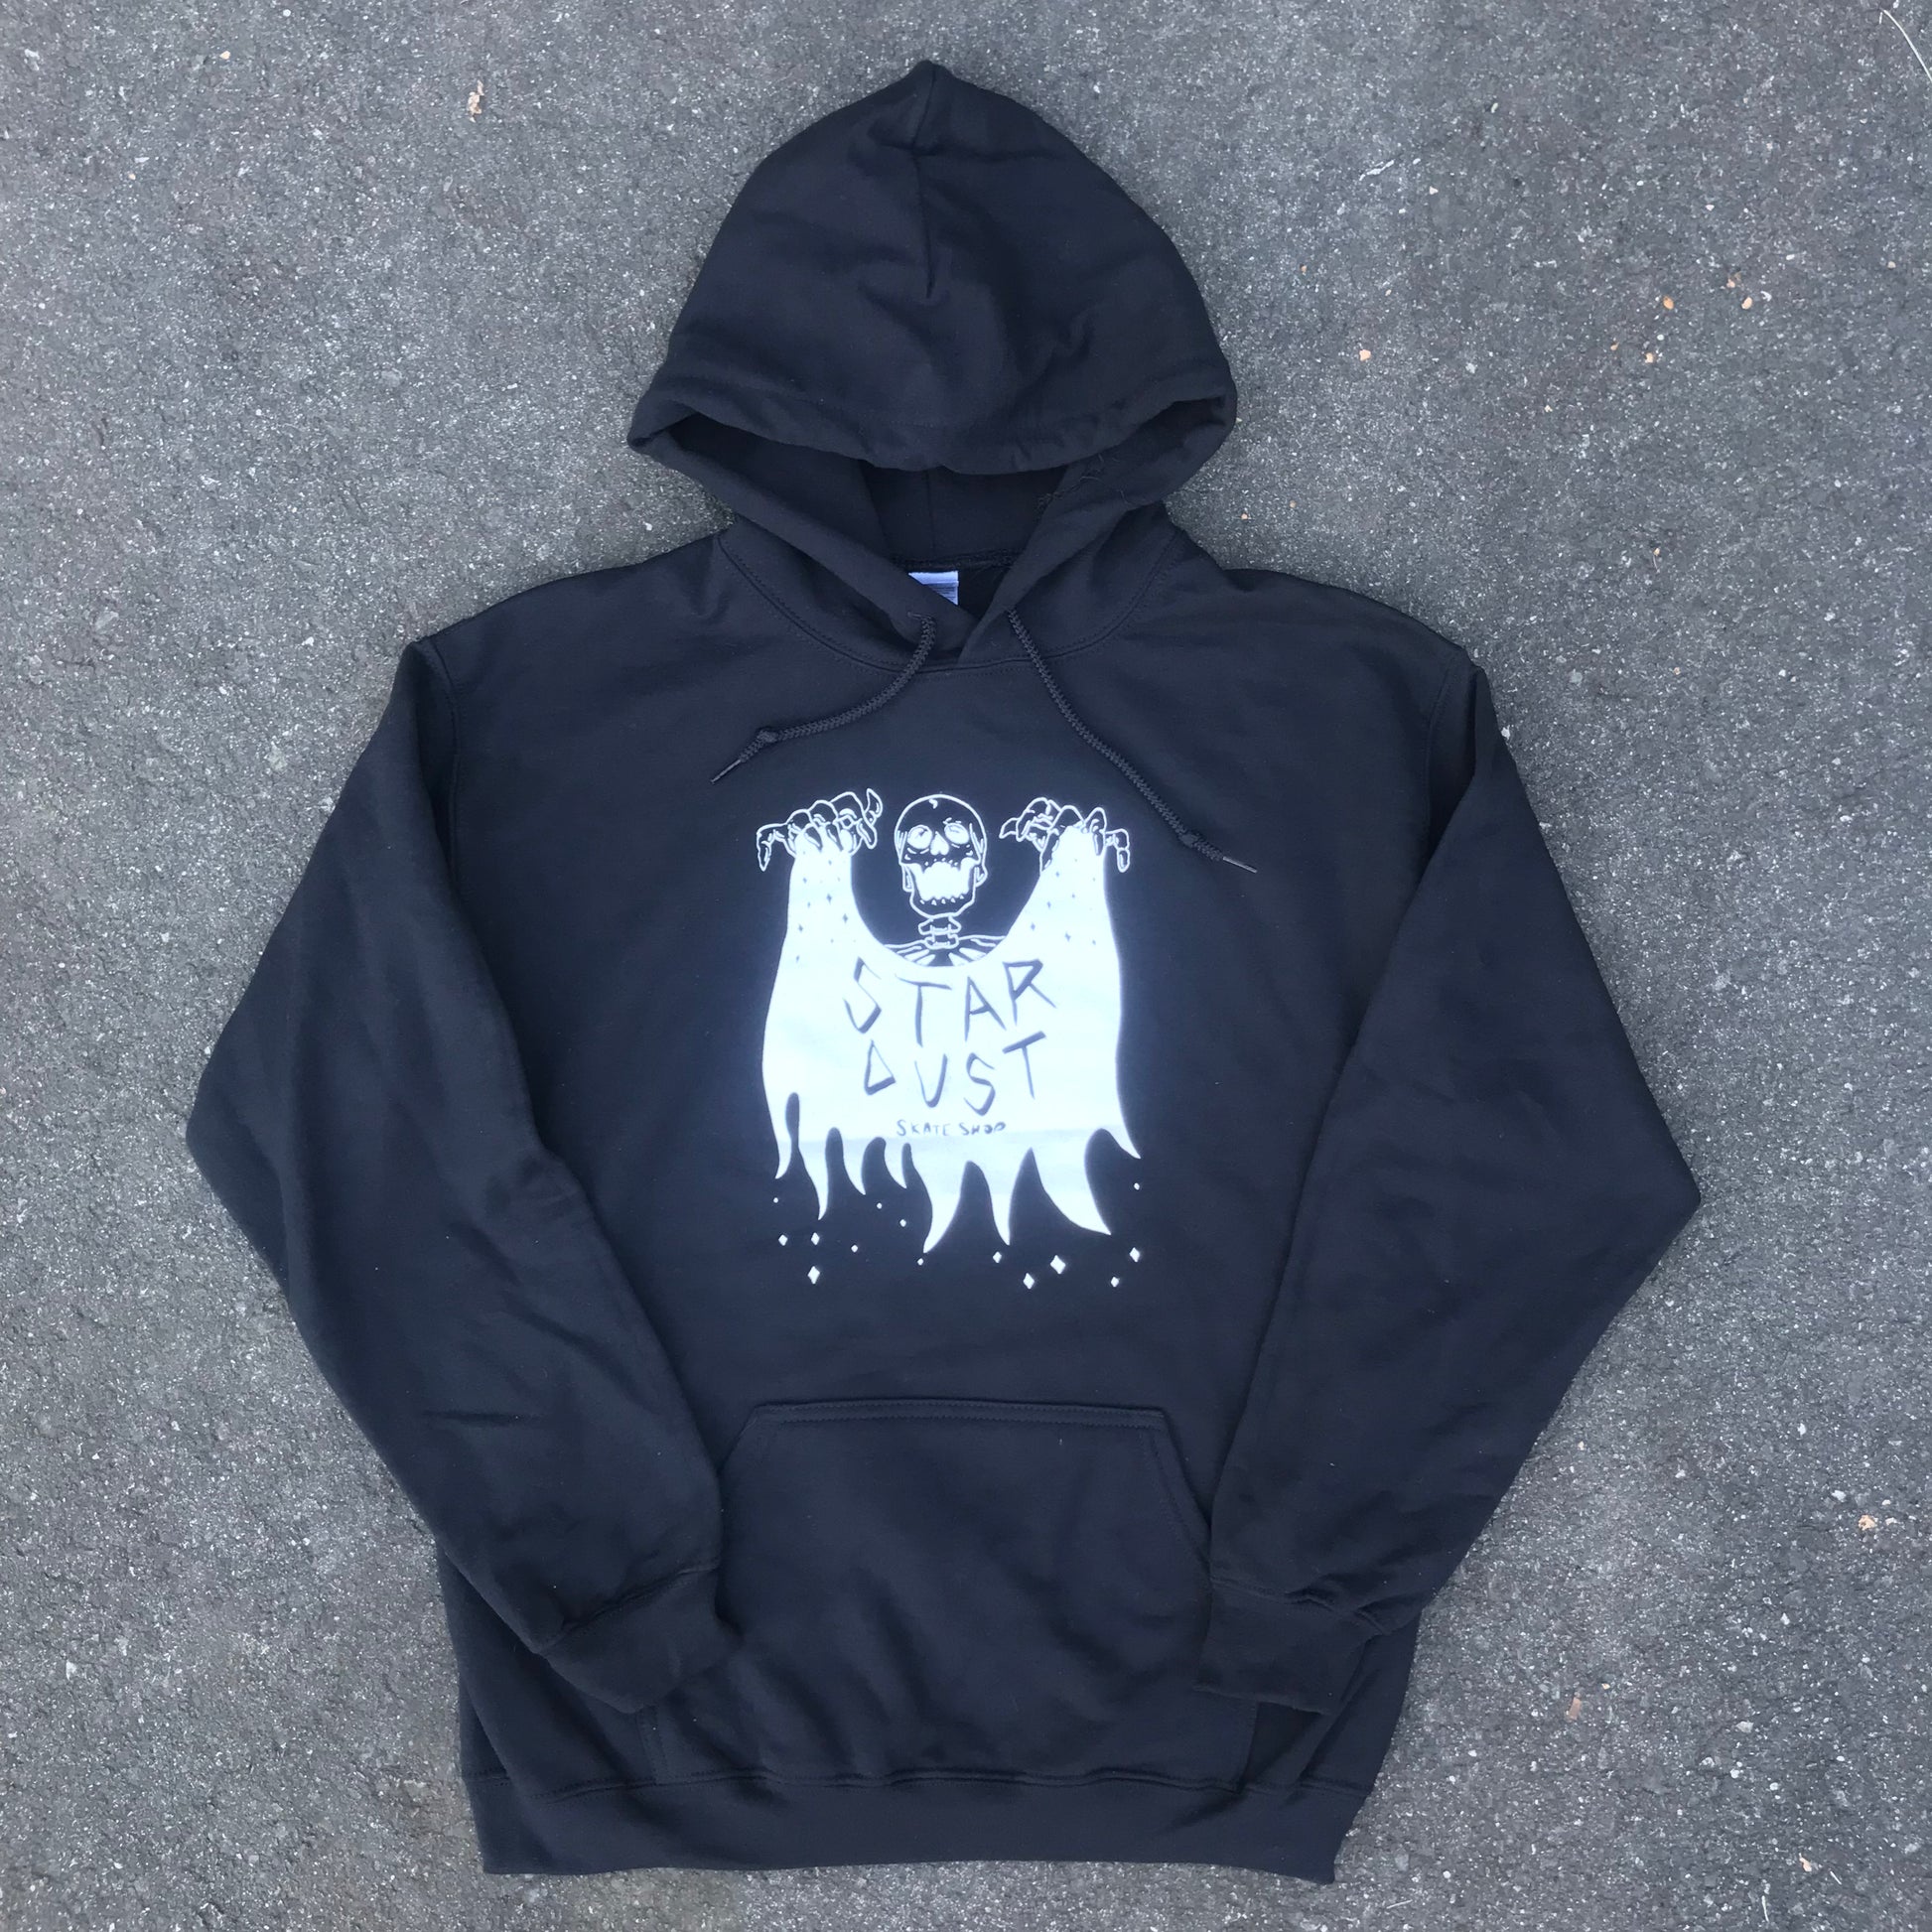 Stardust Skeleton Hoody 008 By Fred Smith Black / White